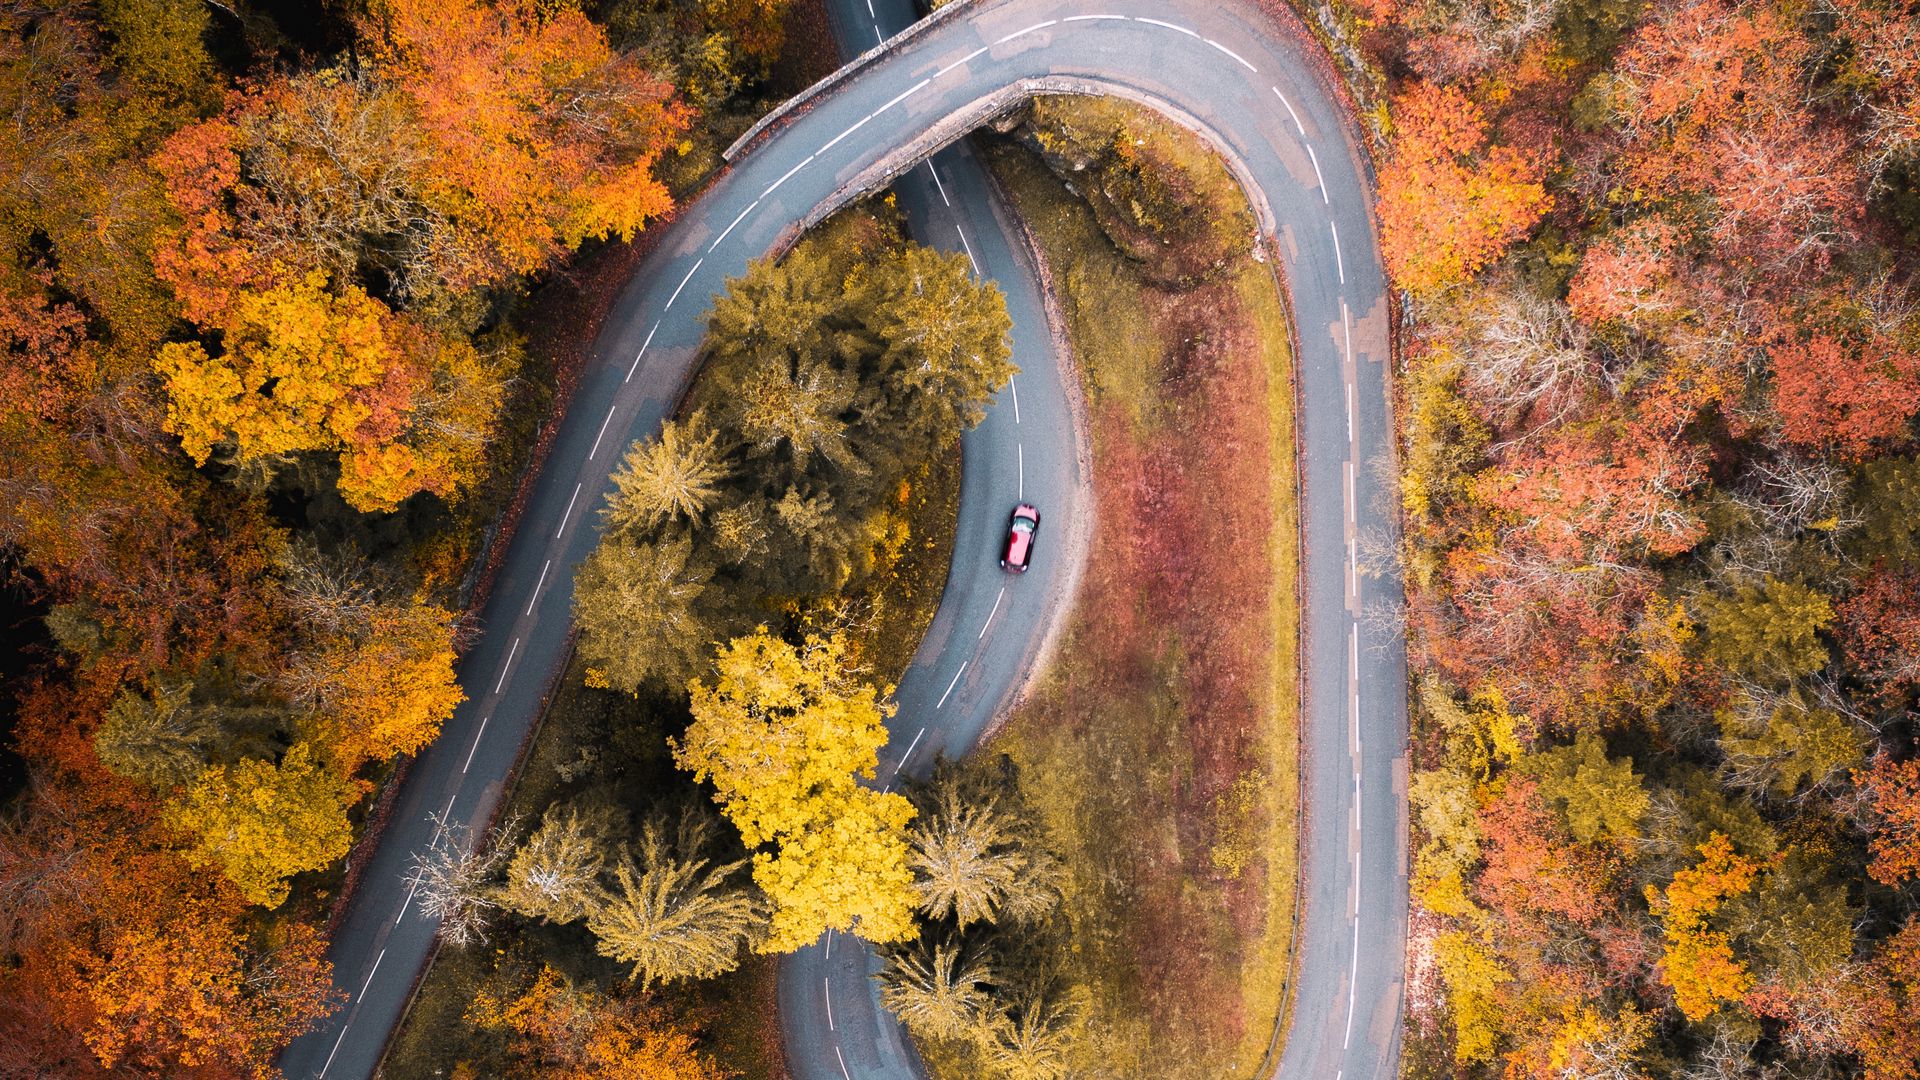 Download wallpaper 1920x1080 road, car, aerial view, trees, autumn full hd, hdtv, fhd, 1080p HD background